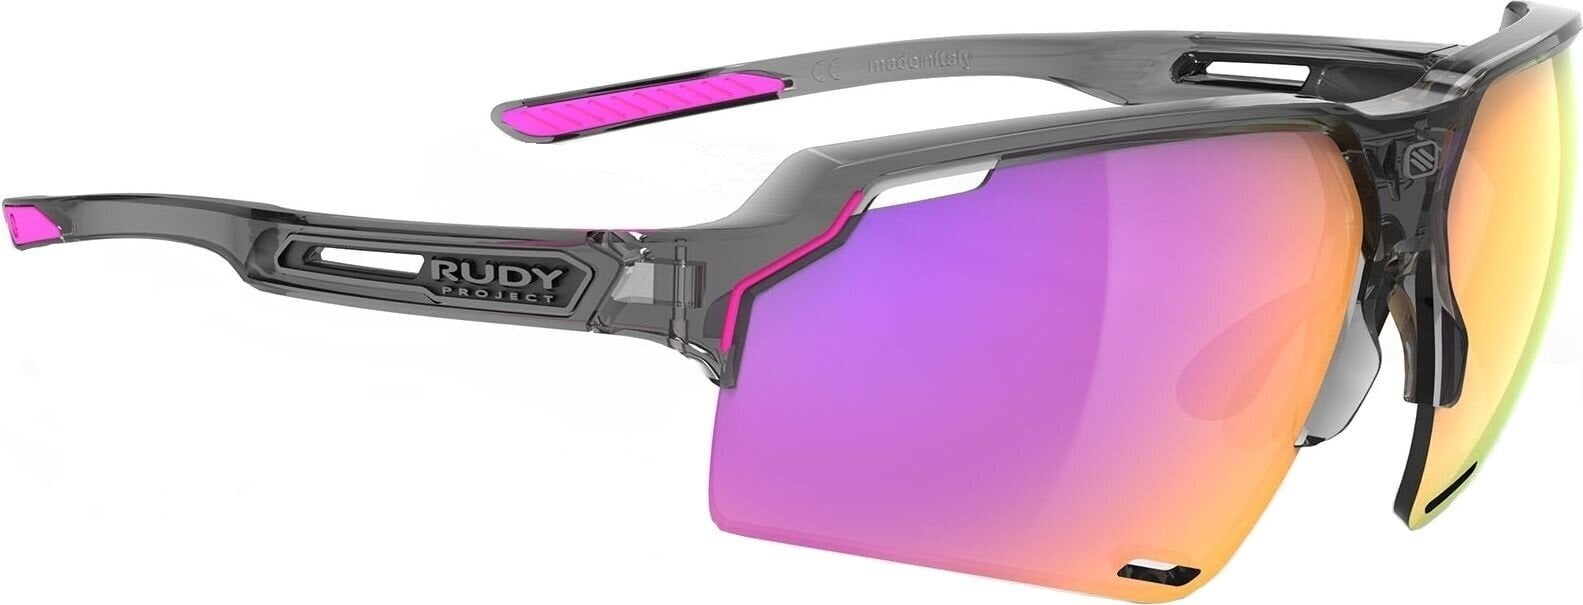 Cycling Glasses Rudy Project Deltabeat Crystal Ash/Multilaser Sunset Cycling Glasses